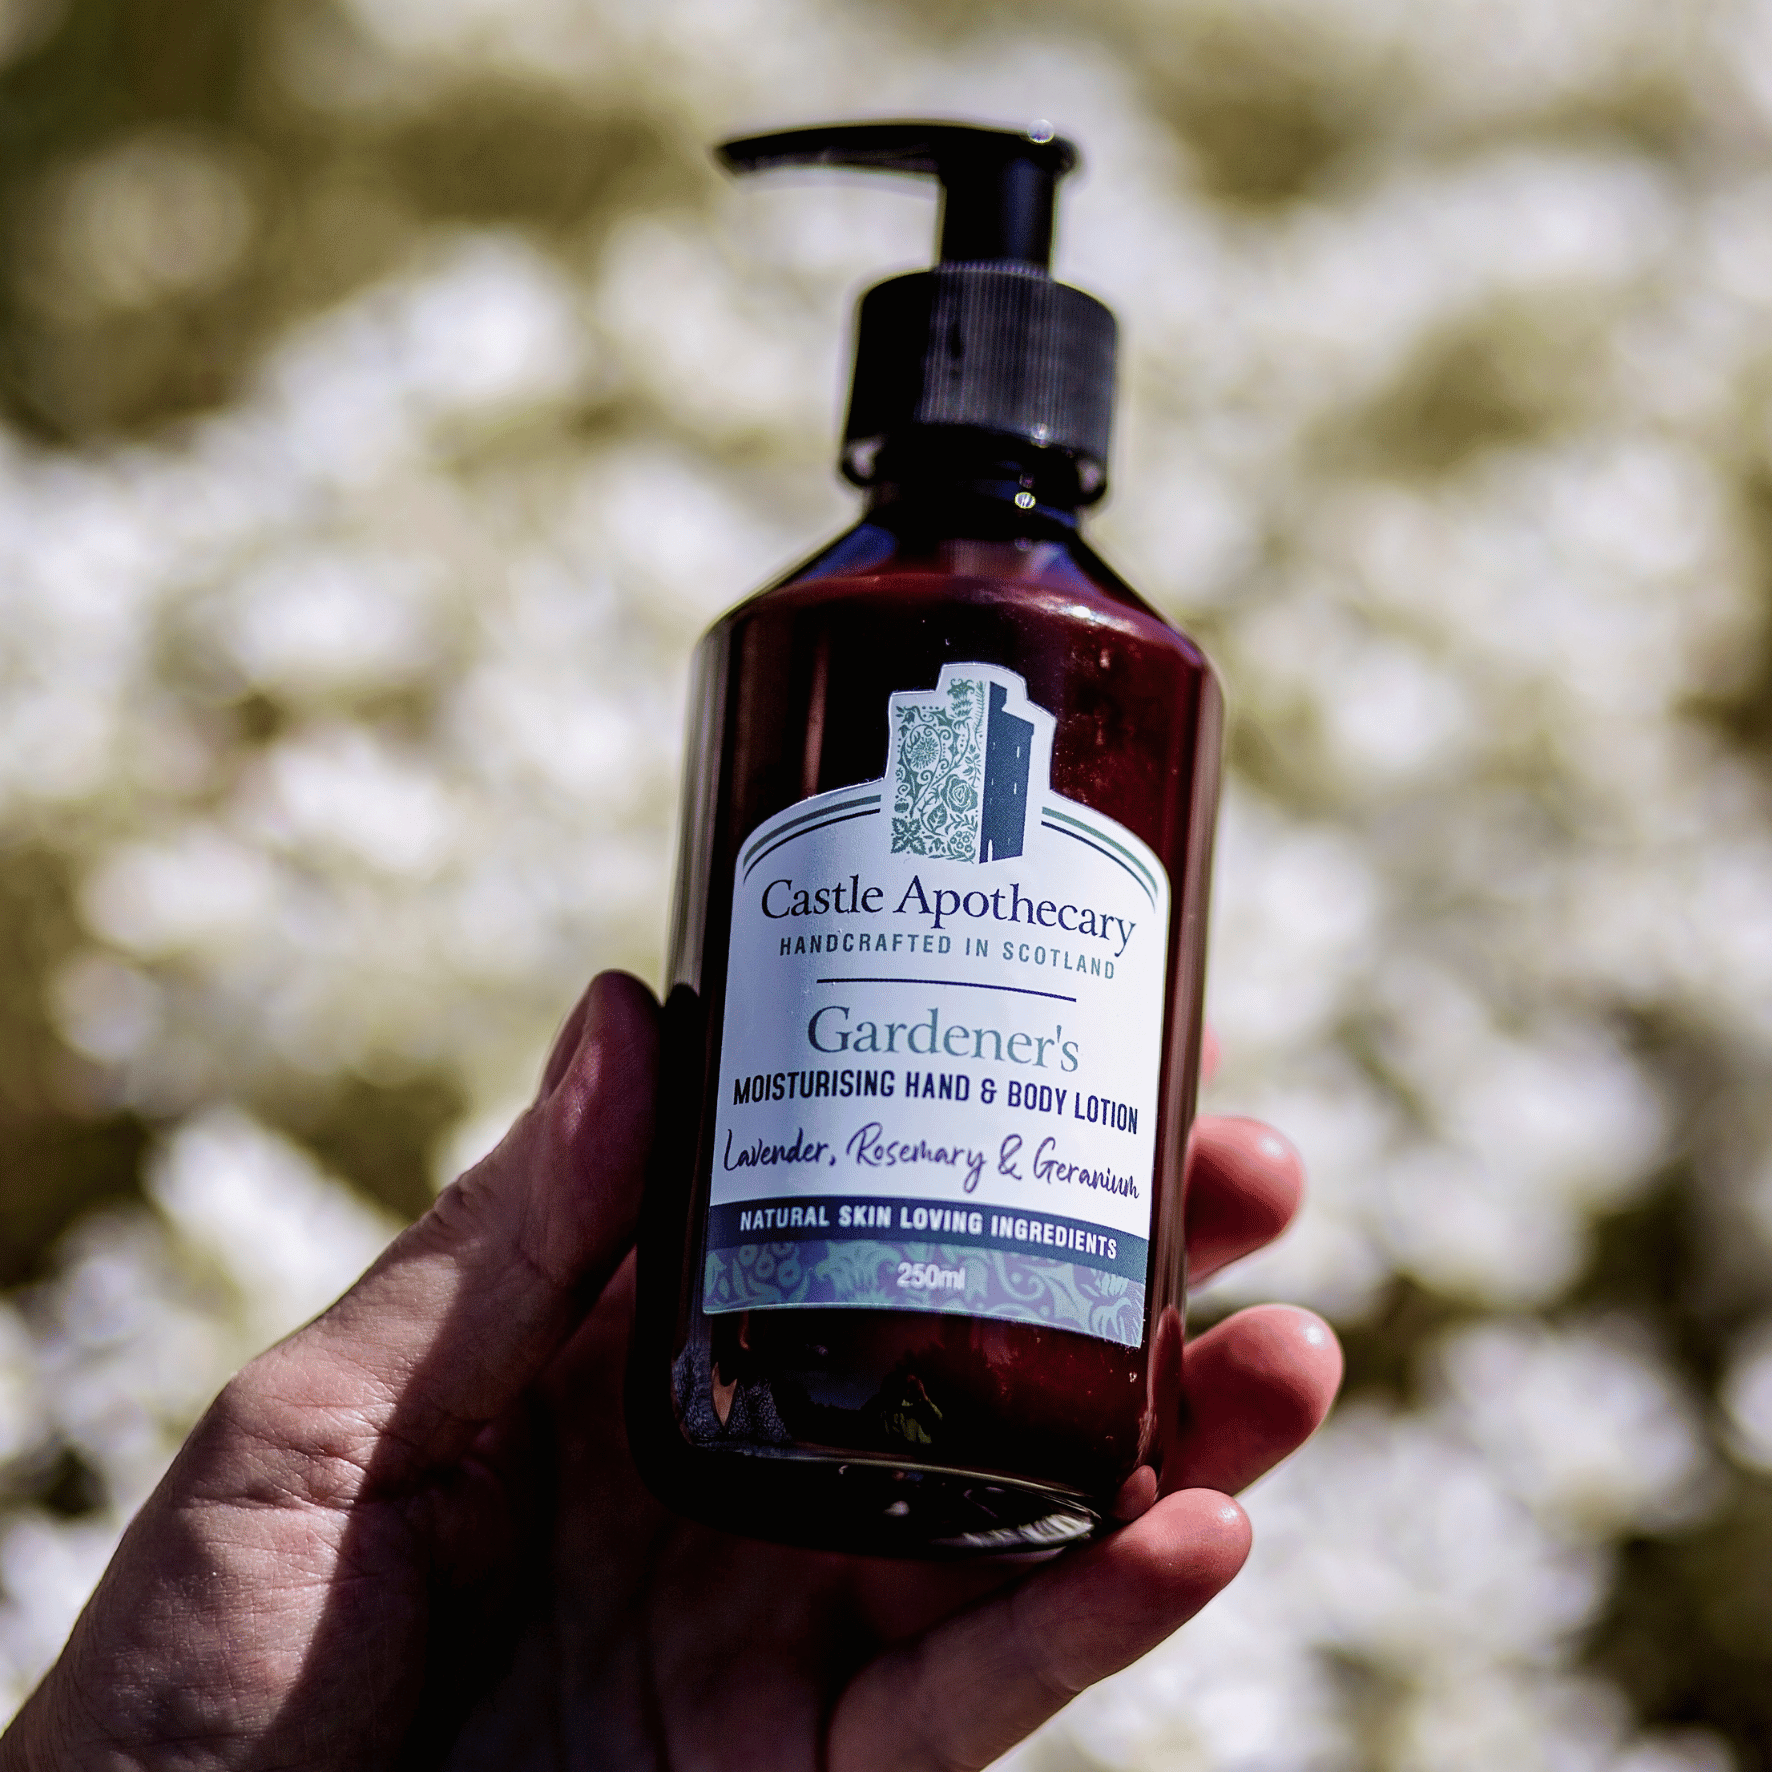 Best selling Scottish natural skincare Moisturising Hand & Body Lotion with British ingredients of English Lavender, English Rosemary and Rose Geranium. Scent of a historic castle garden.  Absorbs quickly leaving hands feeling soft and nourished.  Spa like fragrance